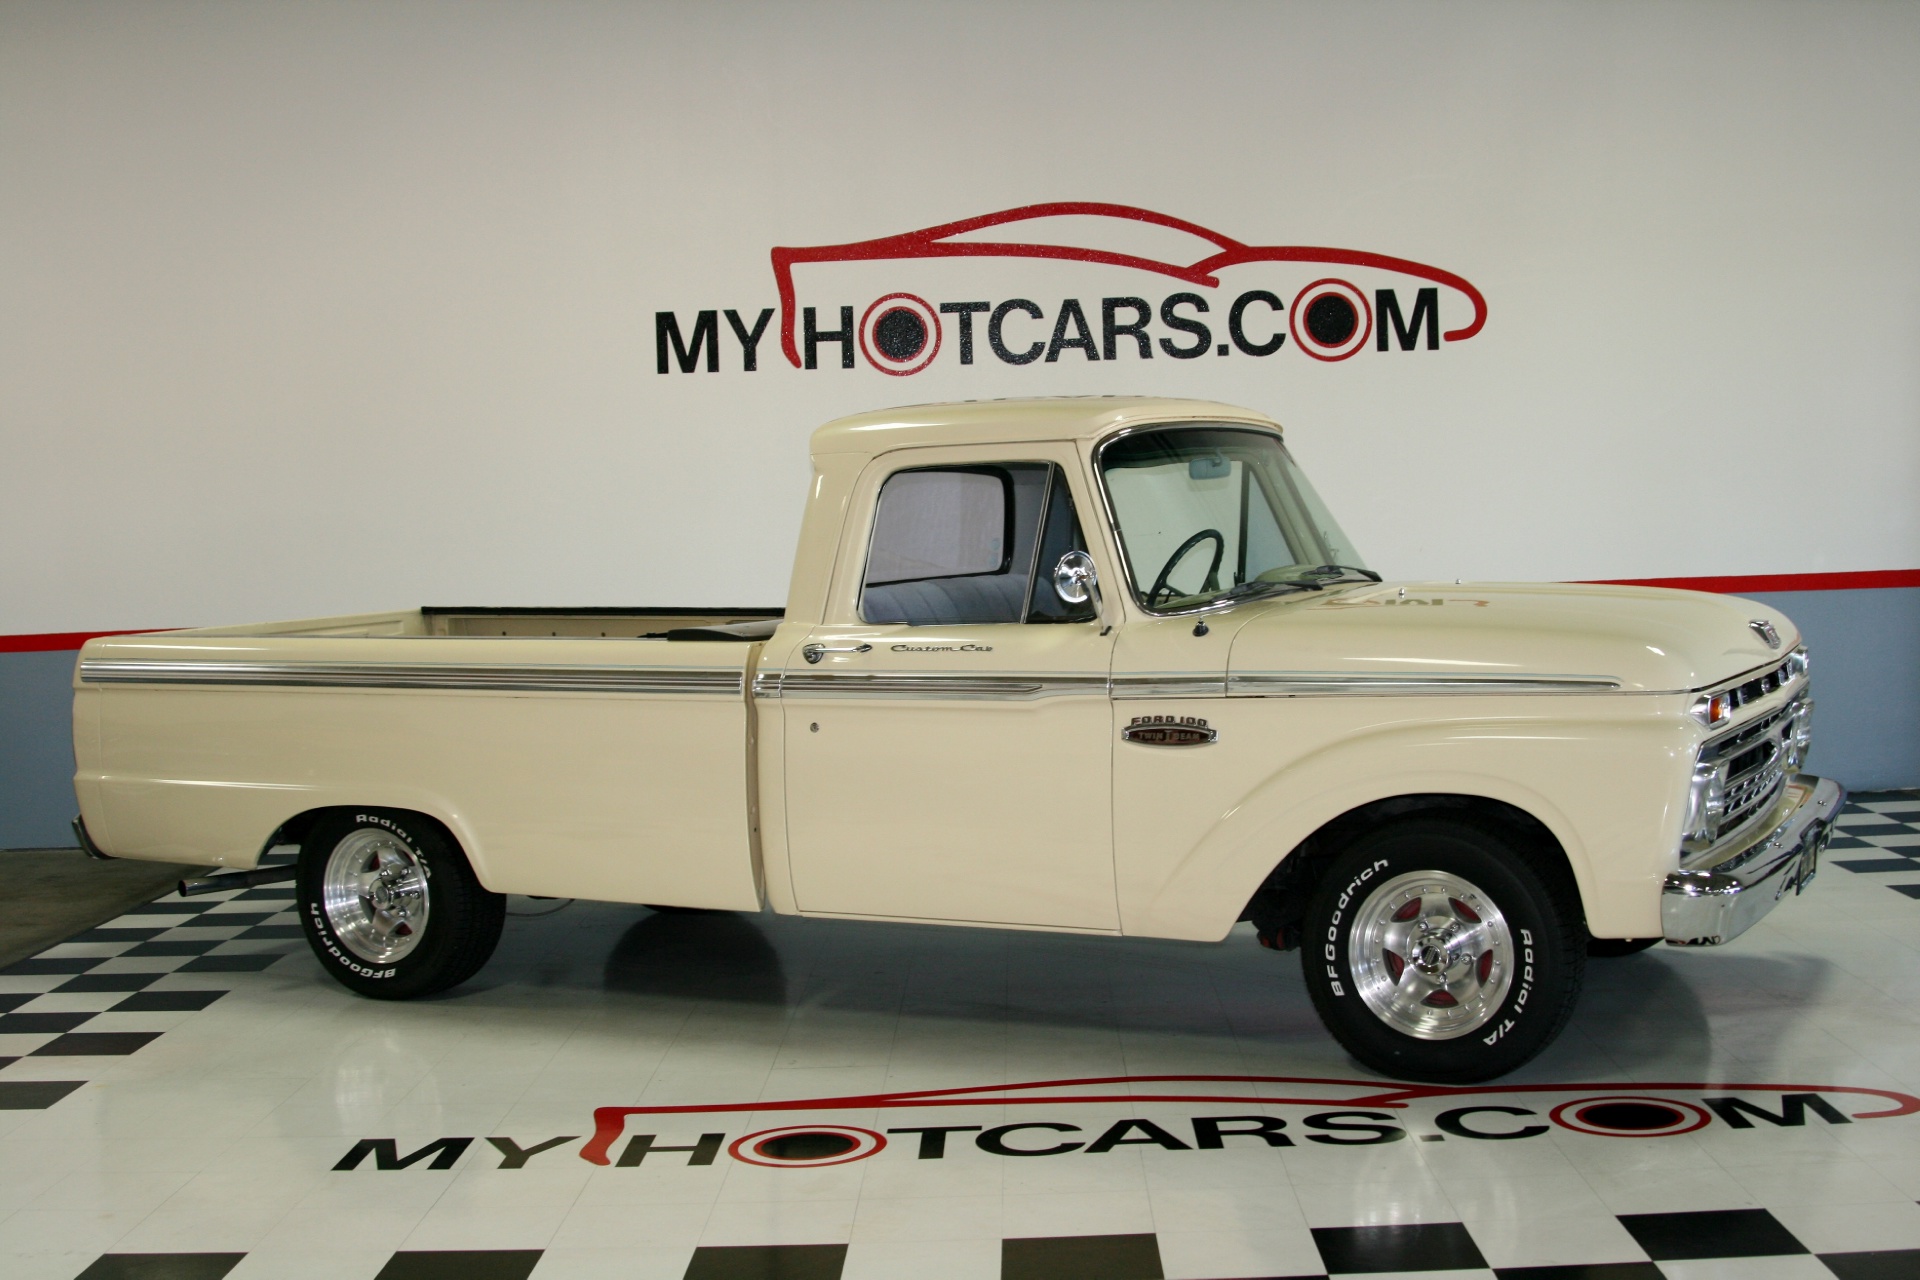 1965 Ford f100 stock wheels #3